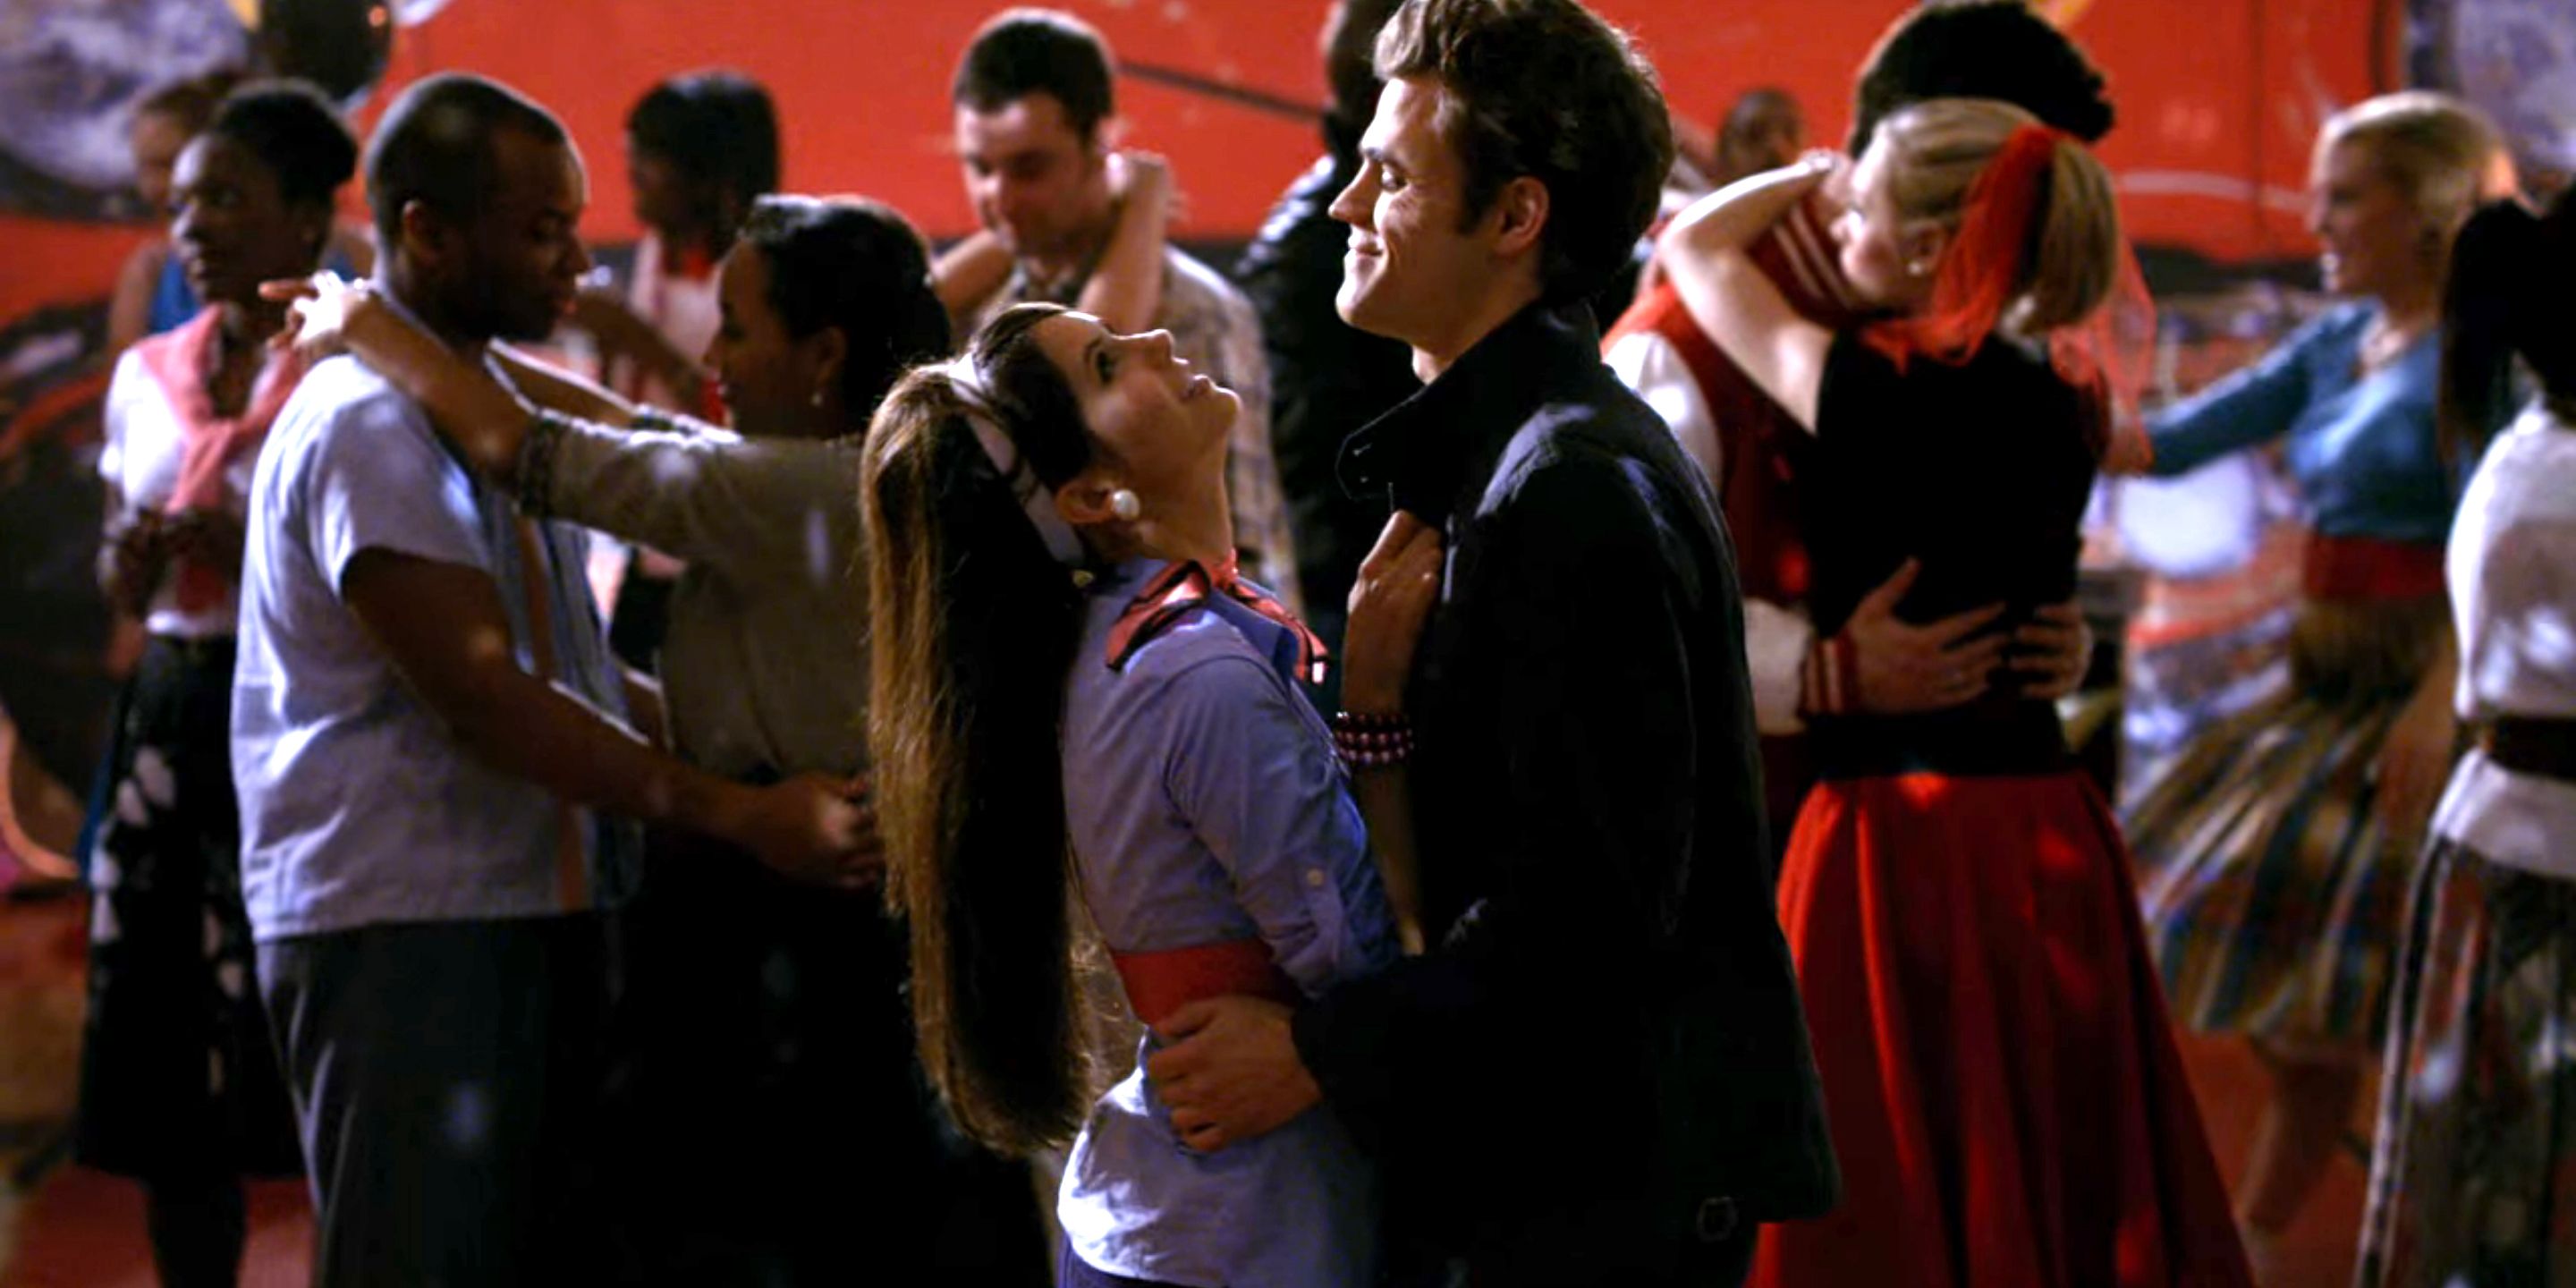 Stefan and Elena dance in The Vampire Diaries.